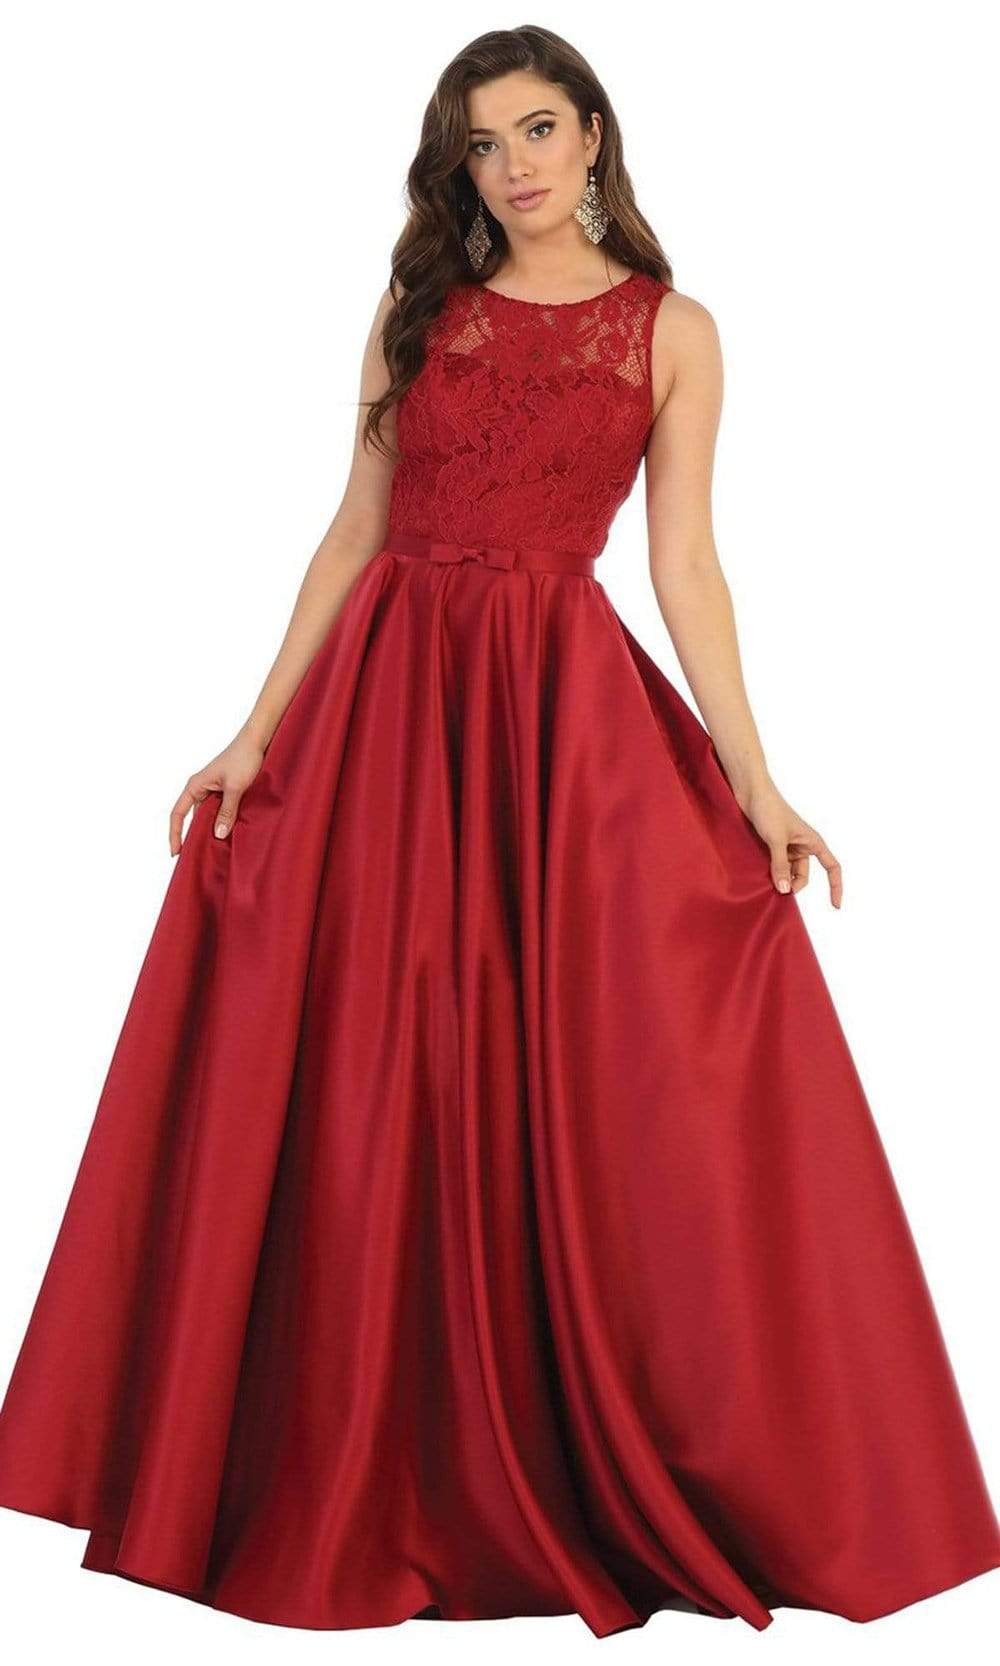 May Queen - MQ1688 Lovely Lace Tank Bow Accent Satin Long Dress Bridesmaid Dresses 4 / Burgundy